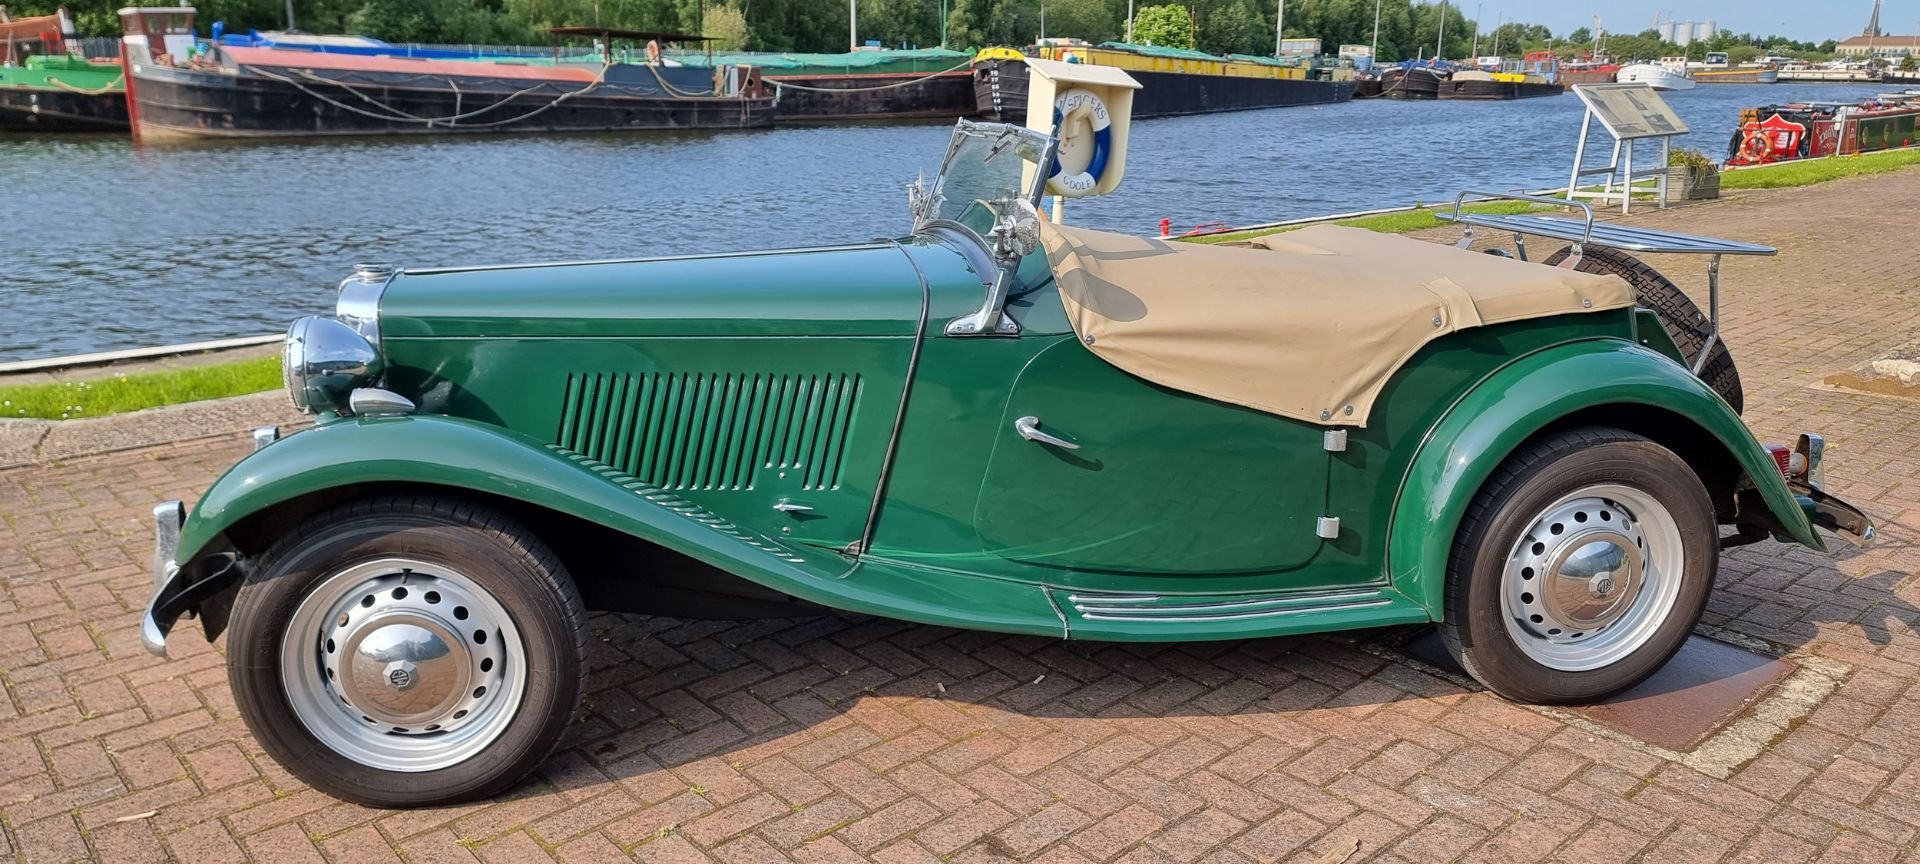 1951 MG TD/C, Mk 2, 1250cc. Registration number KAS 395 (non transferrable). Chassis number TD/ - Image 3 of 20